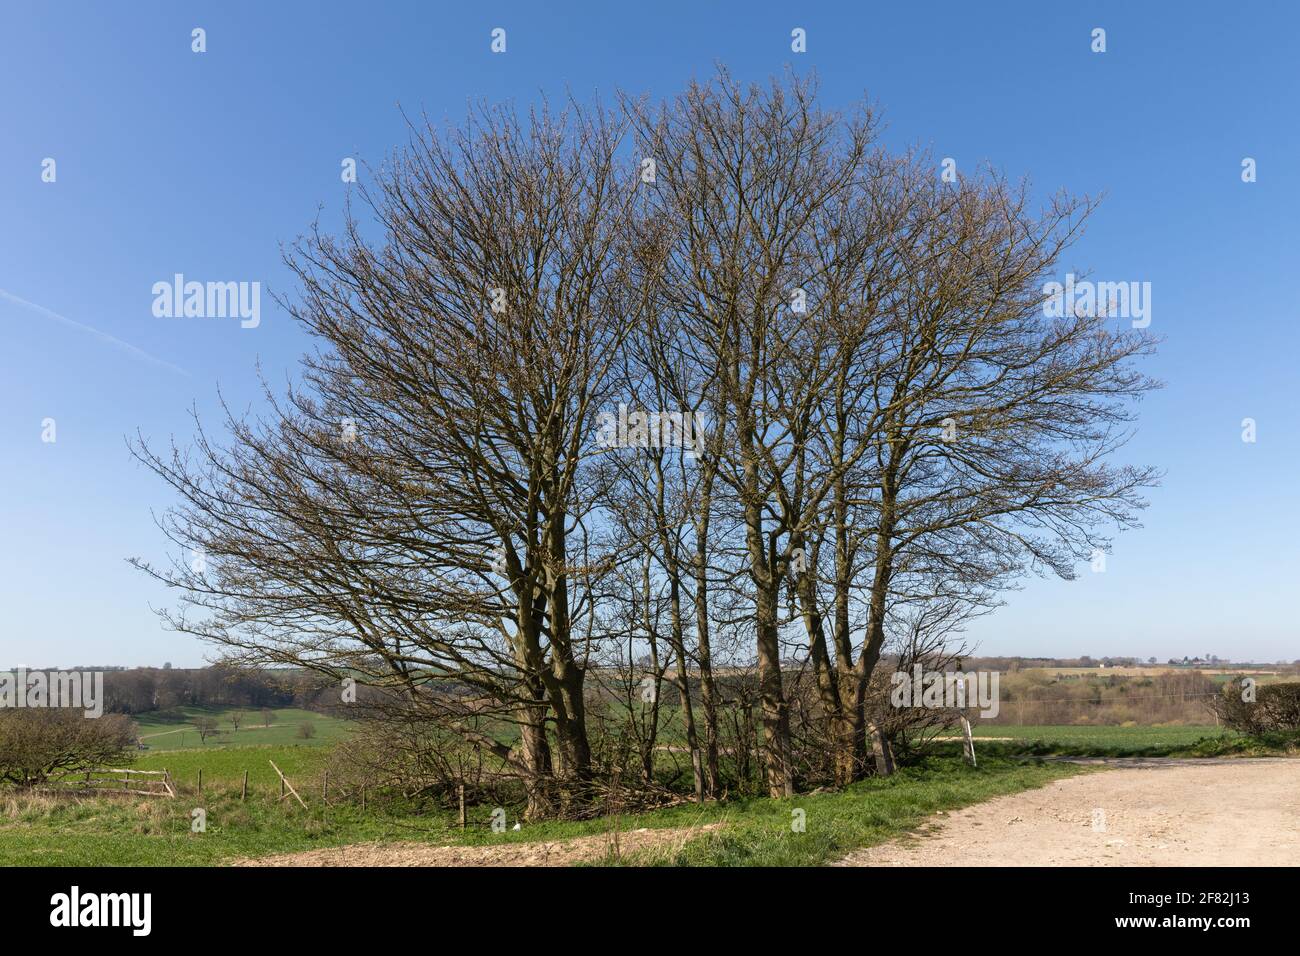 A grove (group of trees) in the Lincolnshire landscape, Biscathorpe, Lincolnshire, England Stock Photo